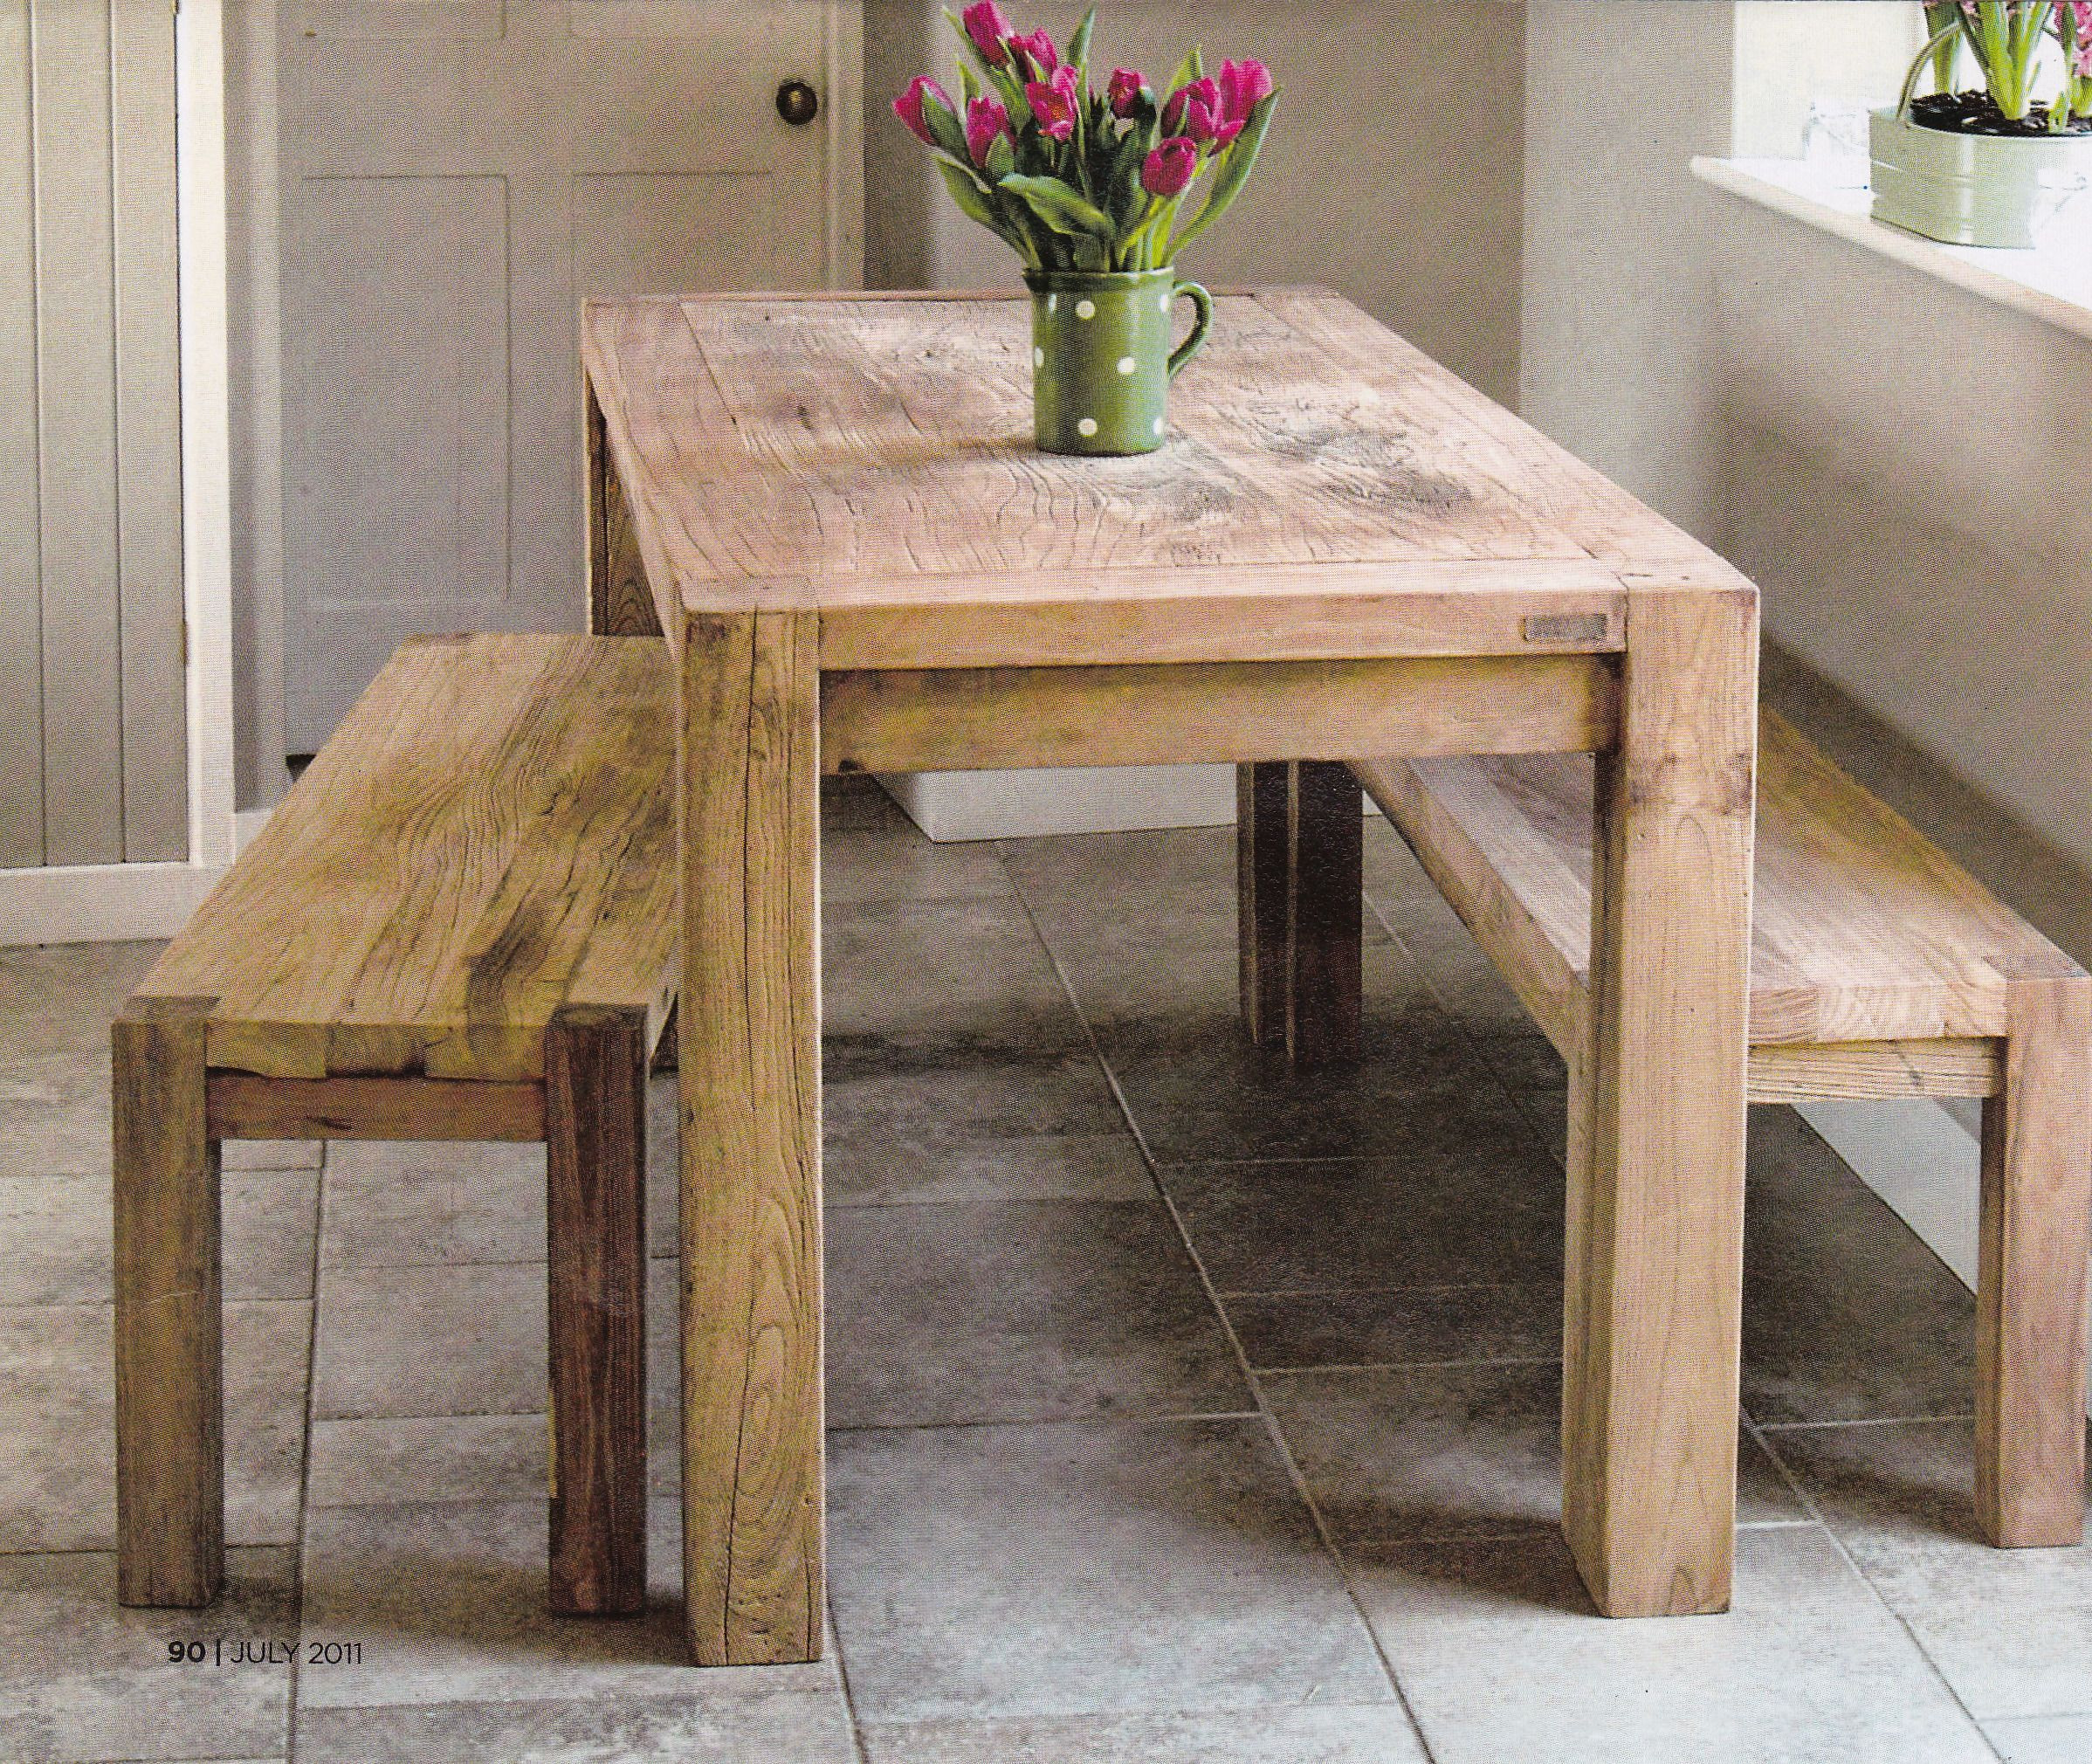 Rustic Kitchen Tables With Bench
 Rustic Kitchen Table with benches that can slide